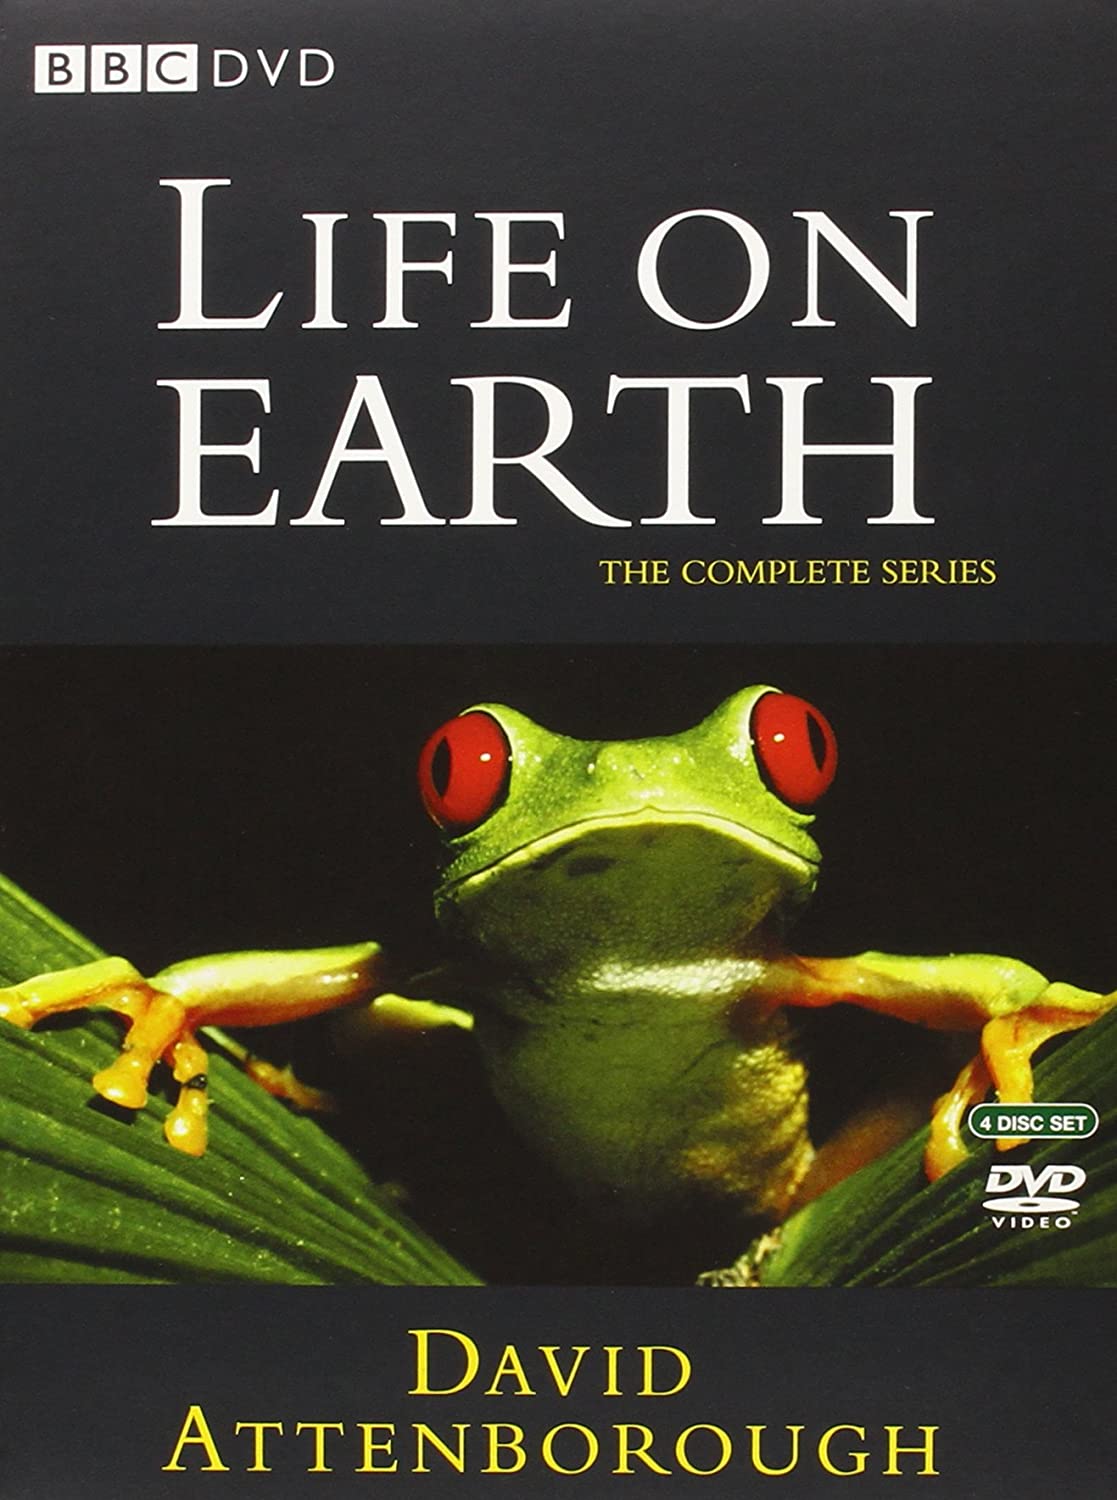 "Life on Earth" with David Attenborough complete series cover